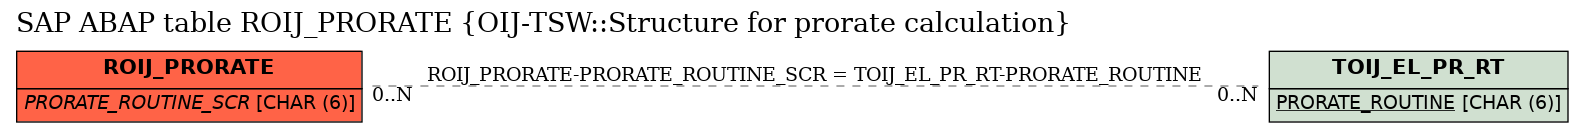 E-R Diagram for table ROIJ_PRORATE (OIJ-TSW::Structure for prorate calculation)